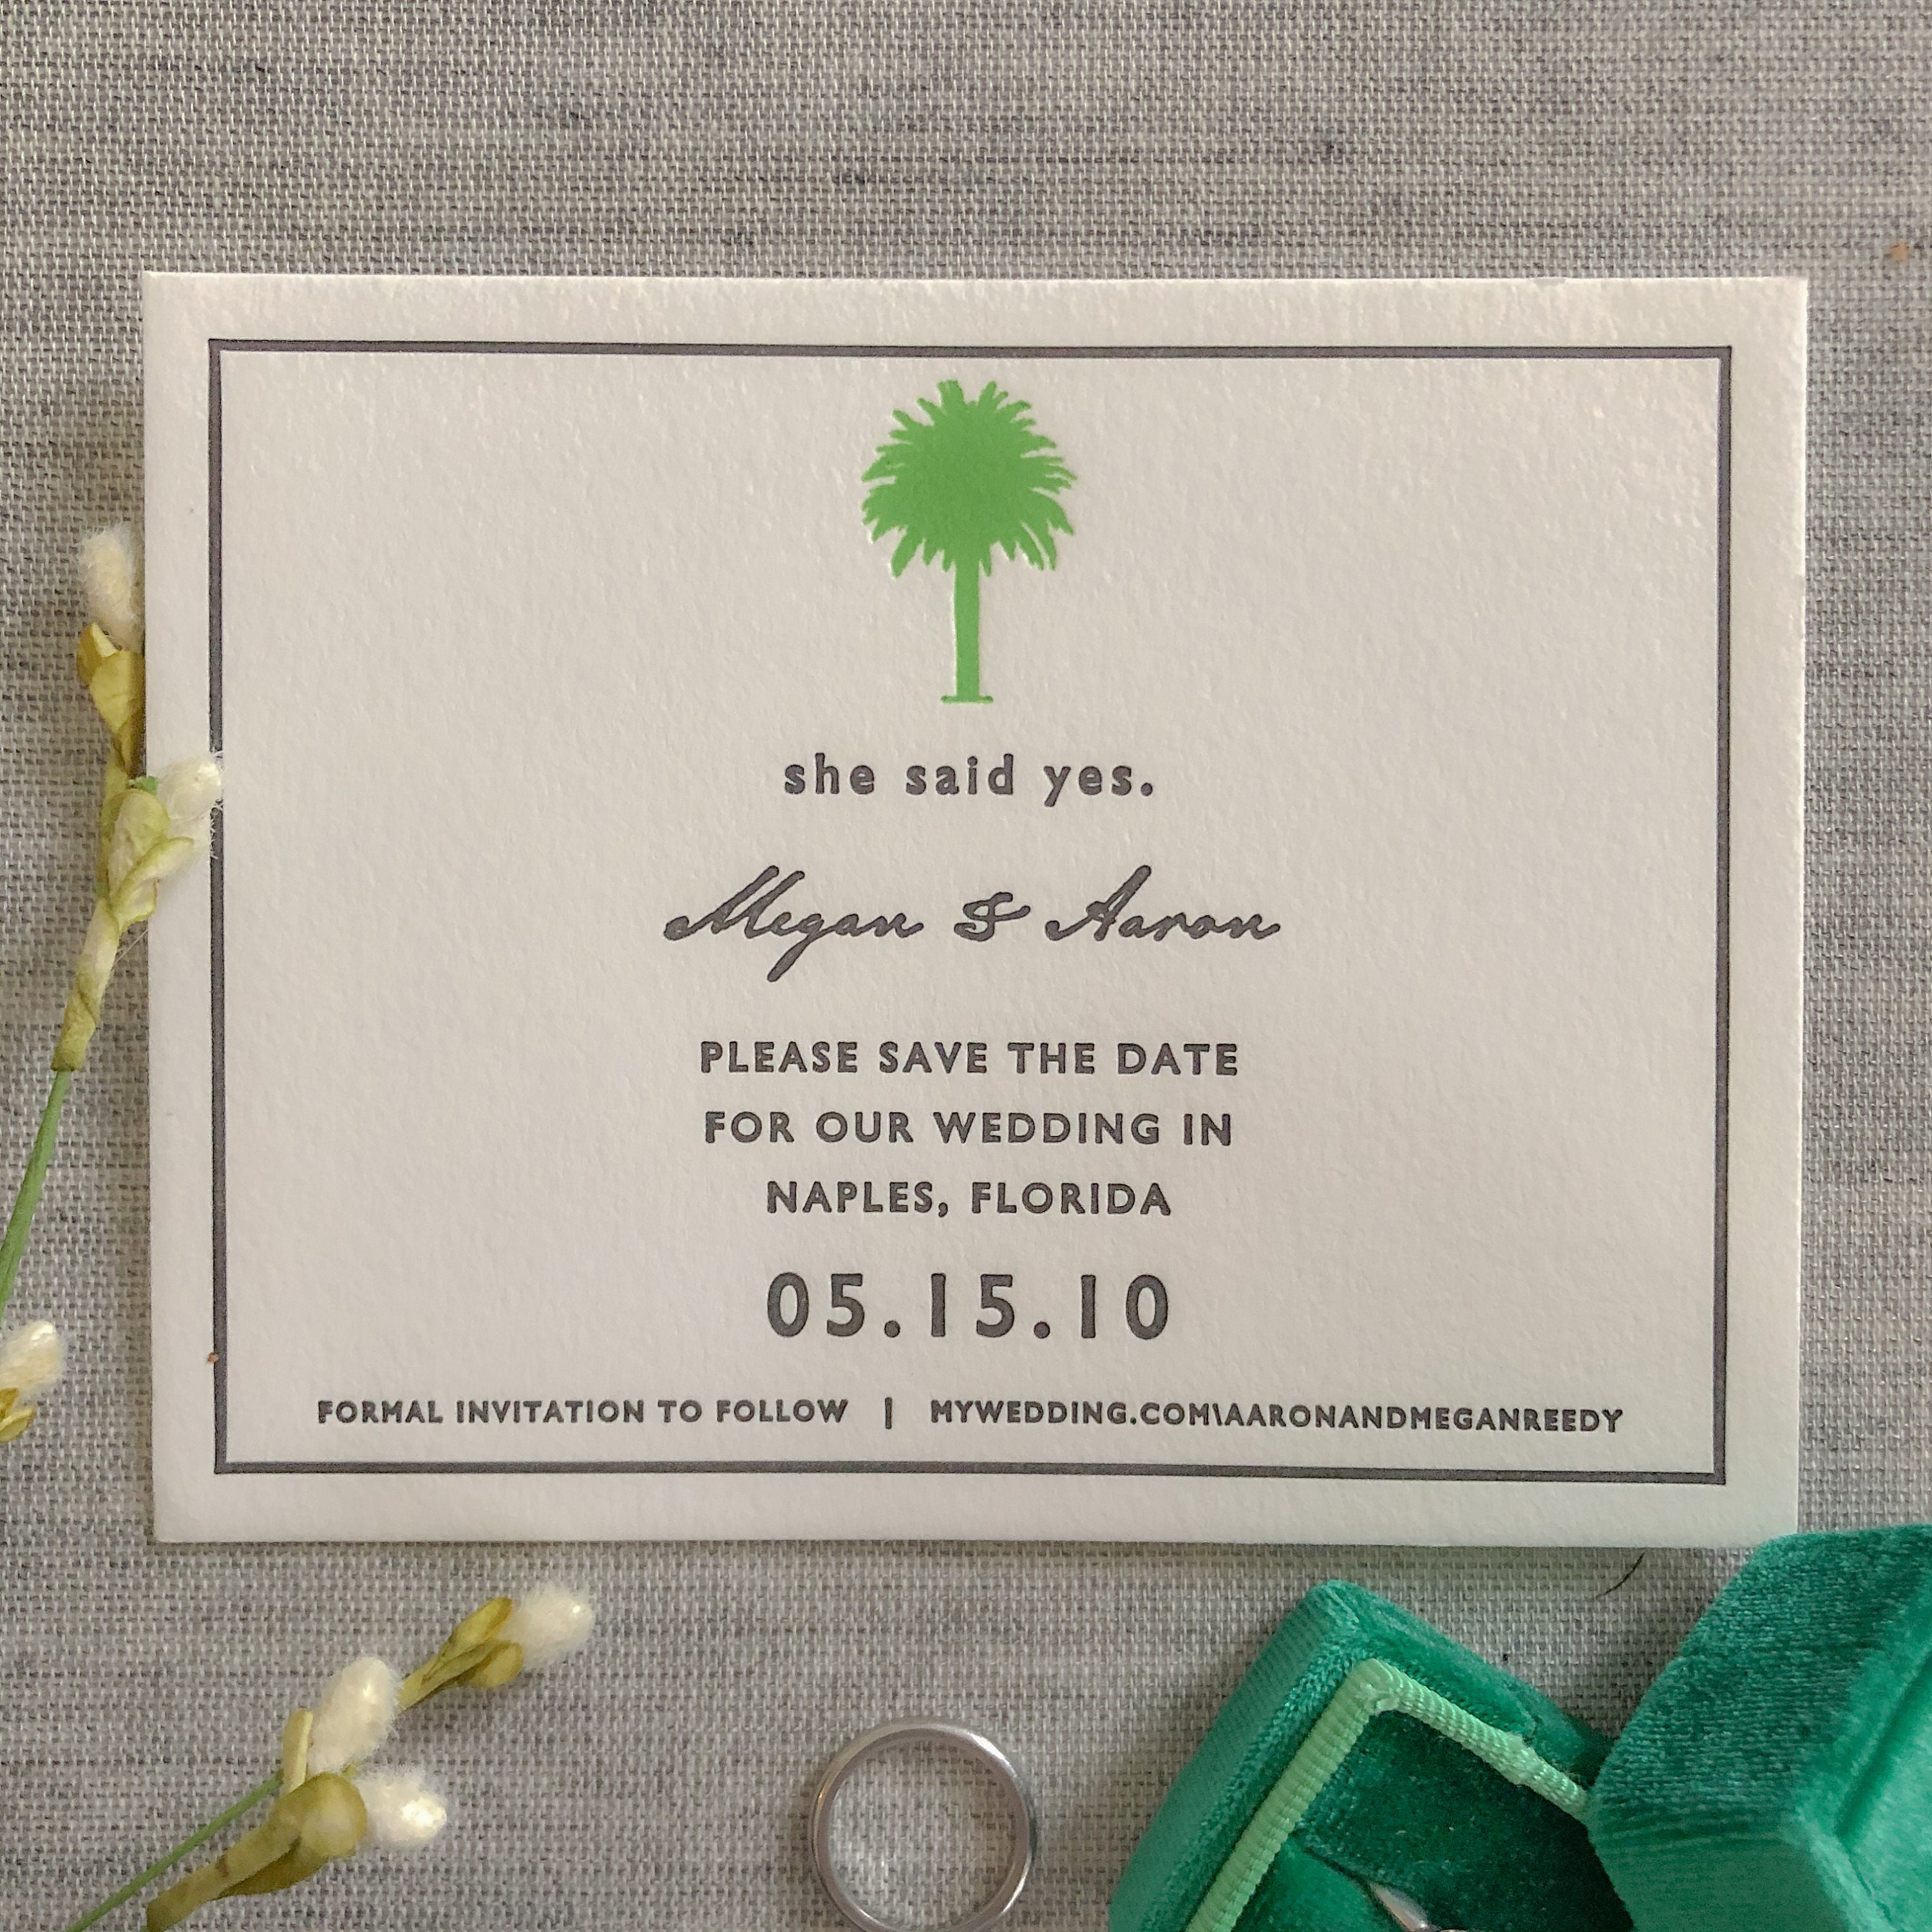 Custom Save the Date Cards